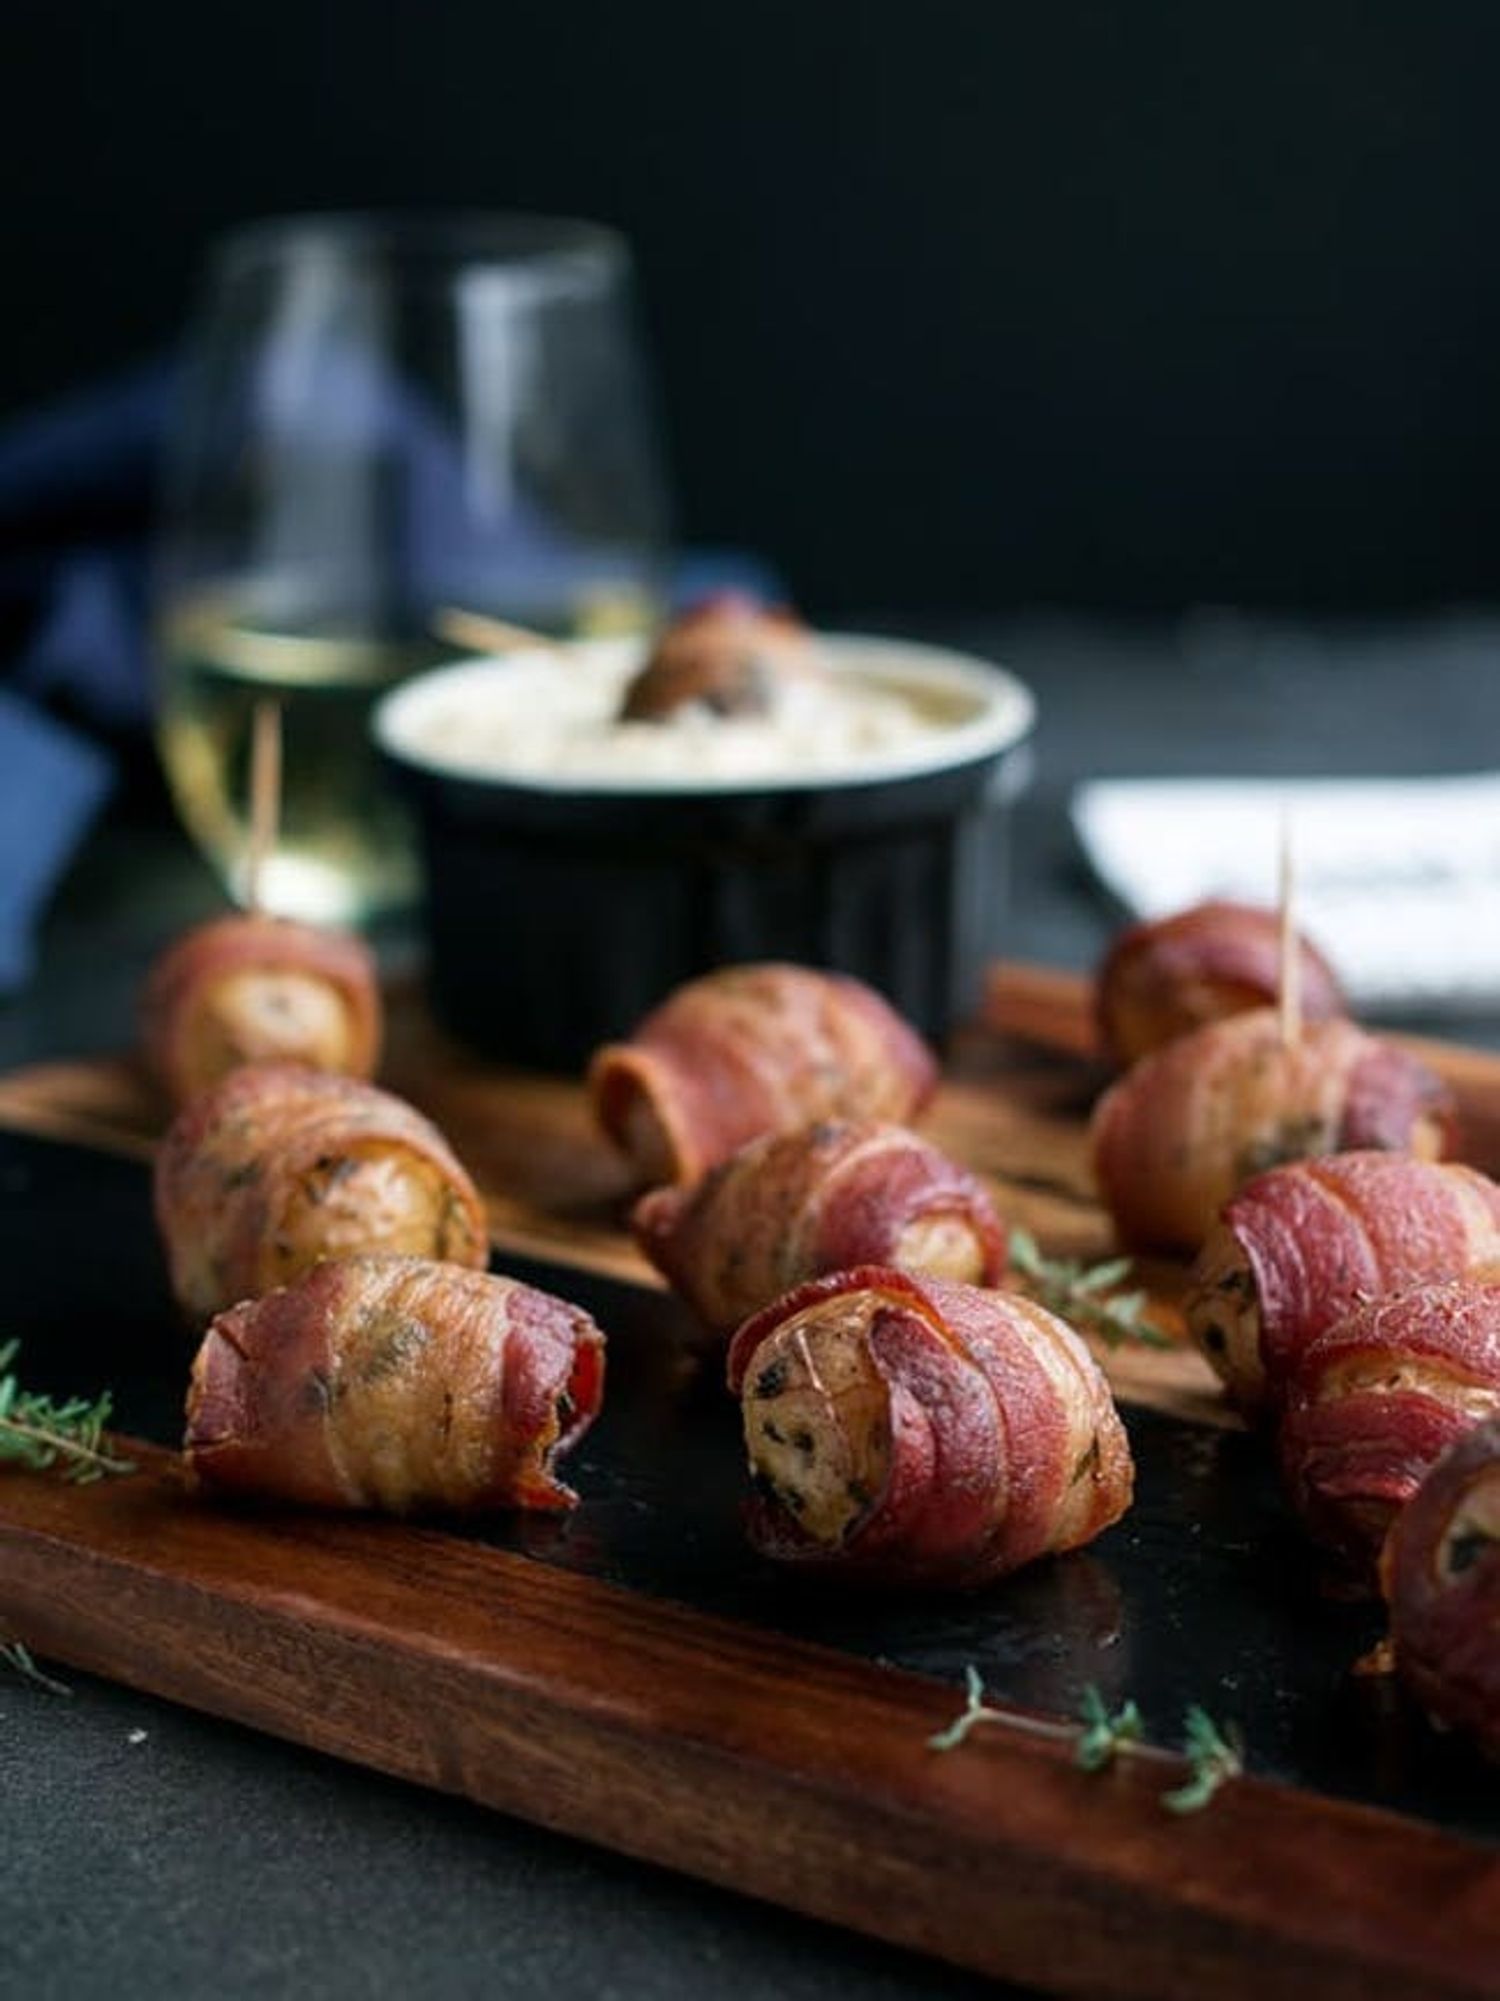 Bacon Wrapped Potatoes With Warm Apple Cream Cheese Dip on a wooden chopping board